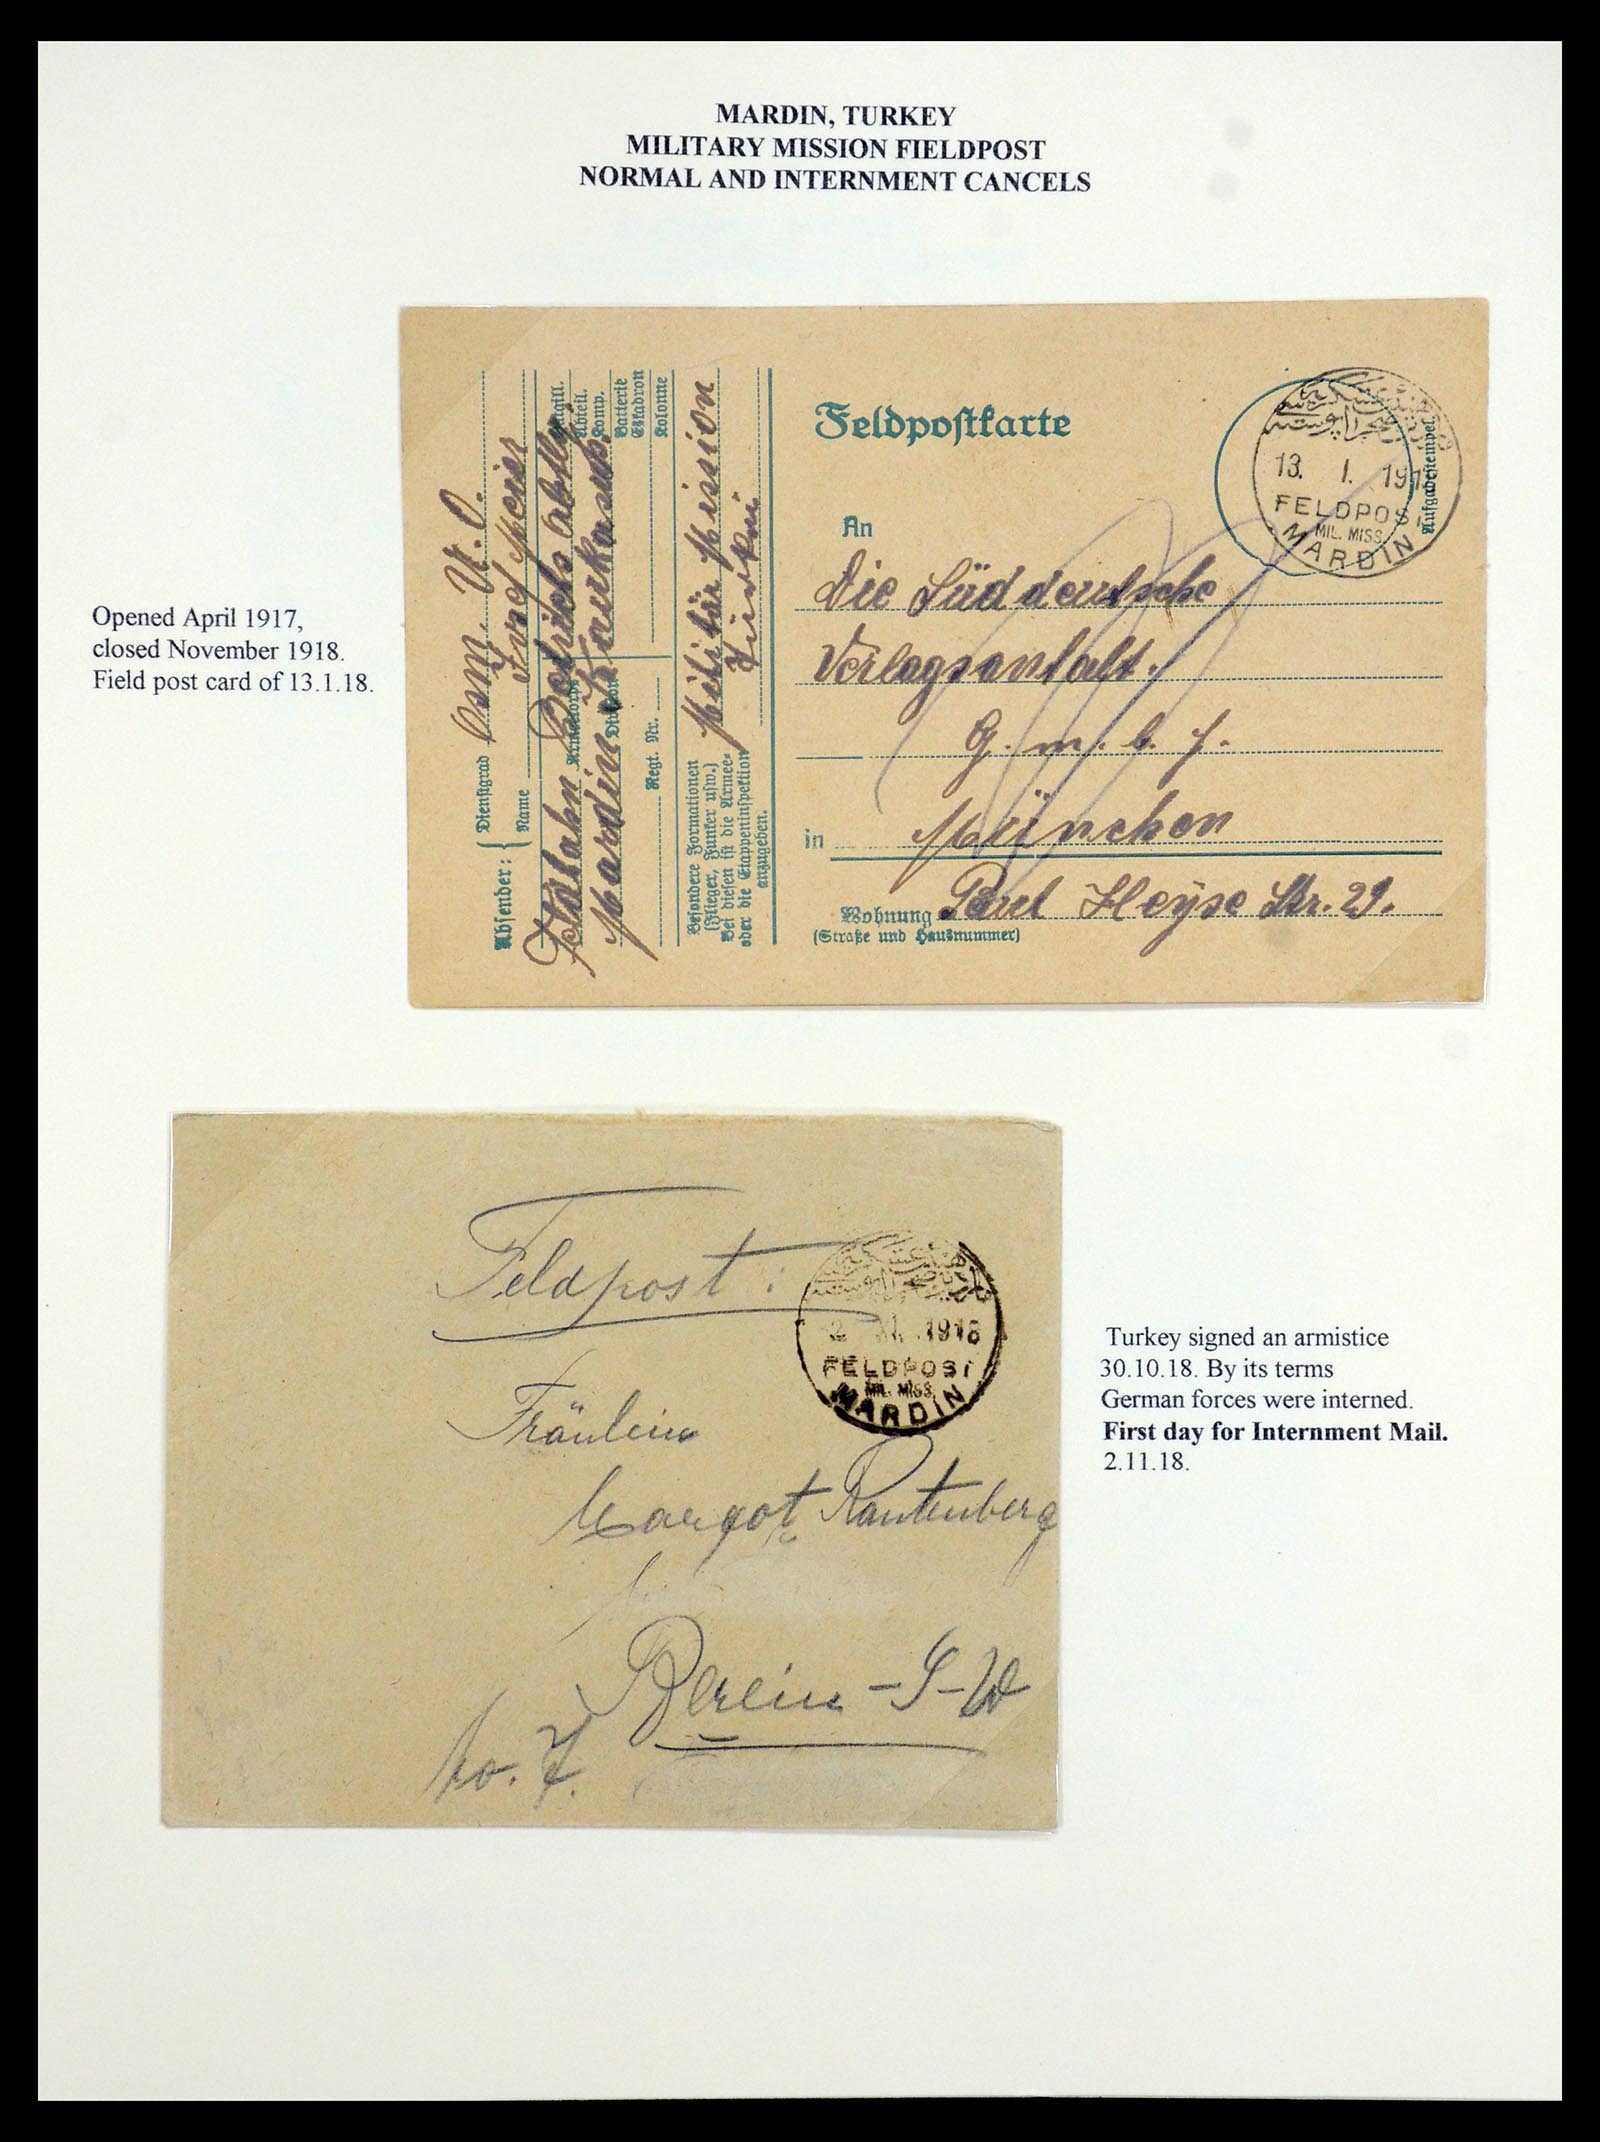 35515 034 - Stamp Collection 35515 Germany covers og Military mission in Turkey 1914